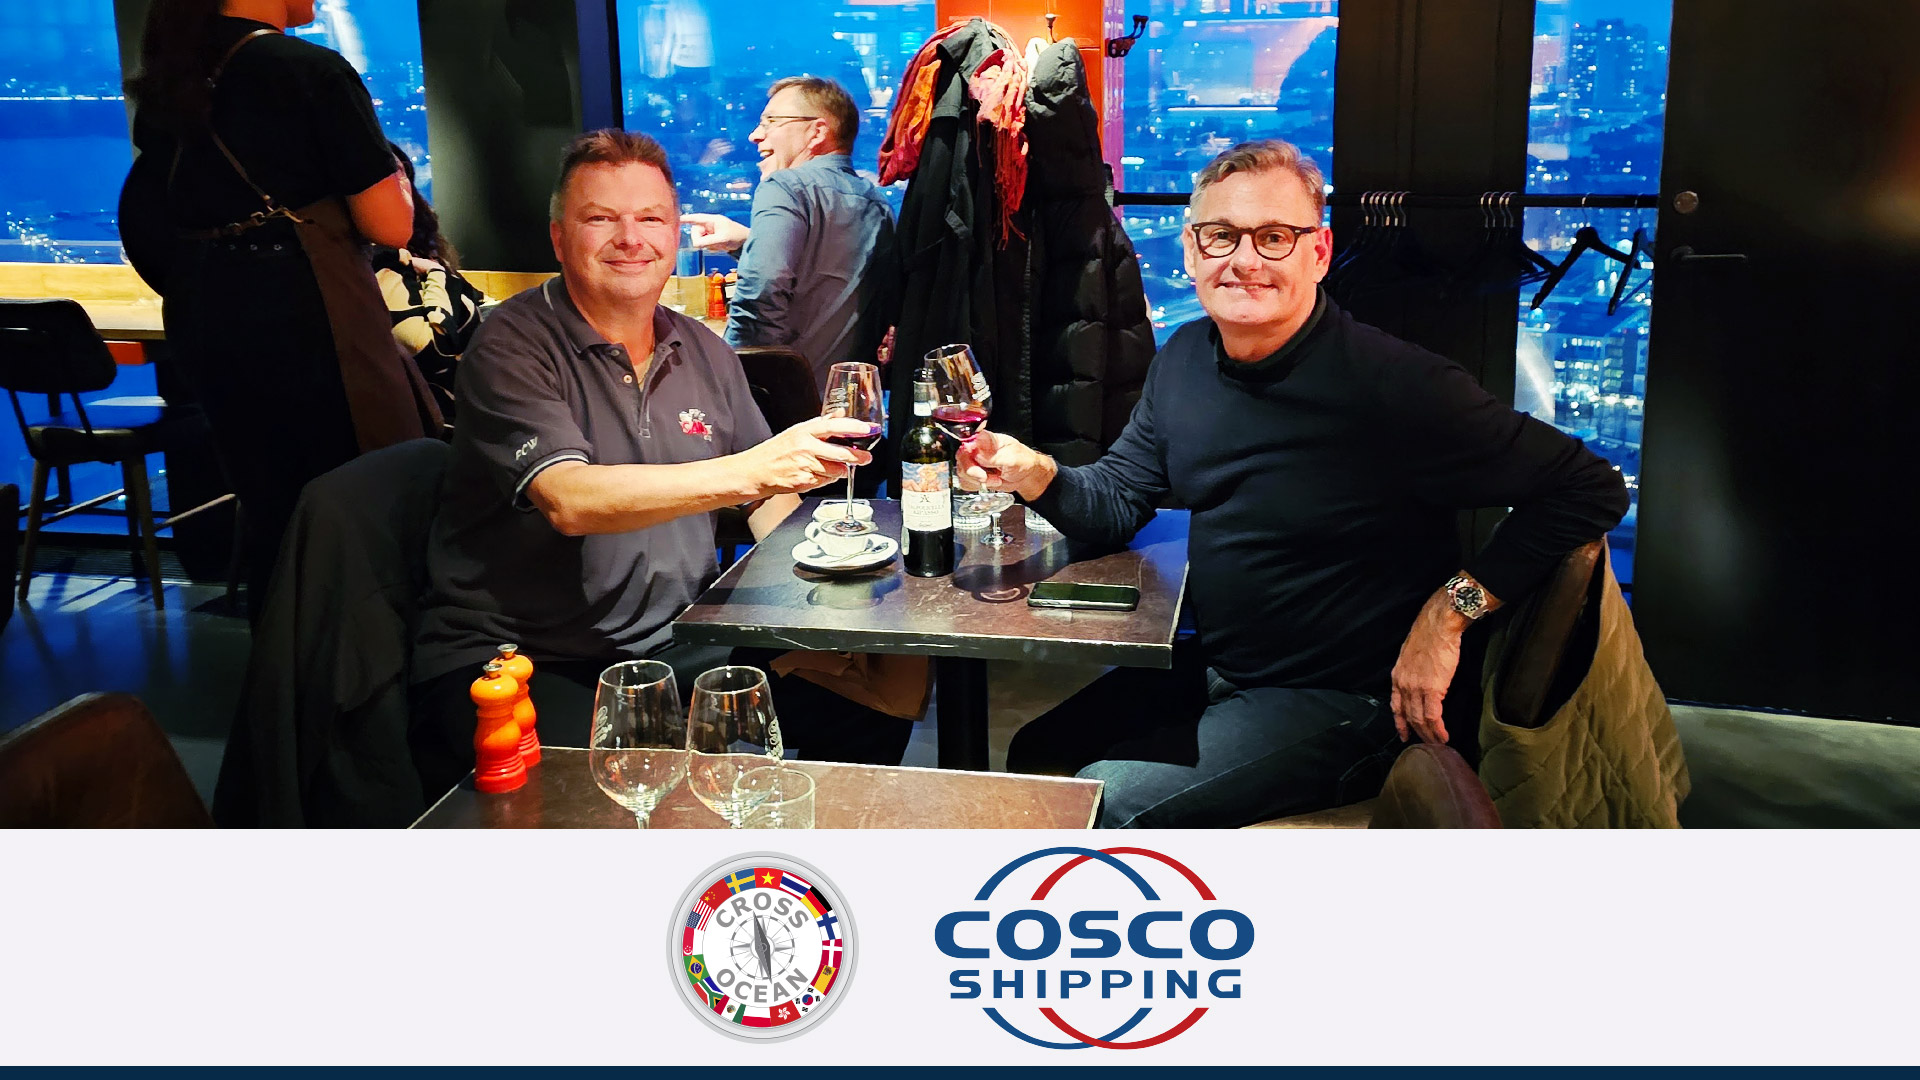 Cross Ocean's Chairman and Mr. Erik Eriksen, Director & Partner of COSCO SHIPPING LINES (SWEDEN) AB meeting at Stockholm 01 Skybar